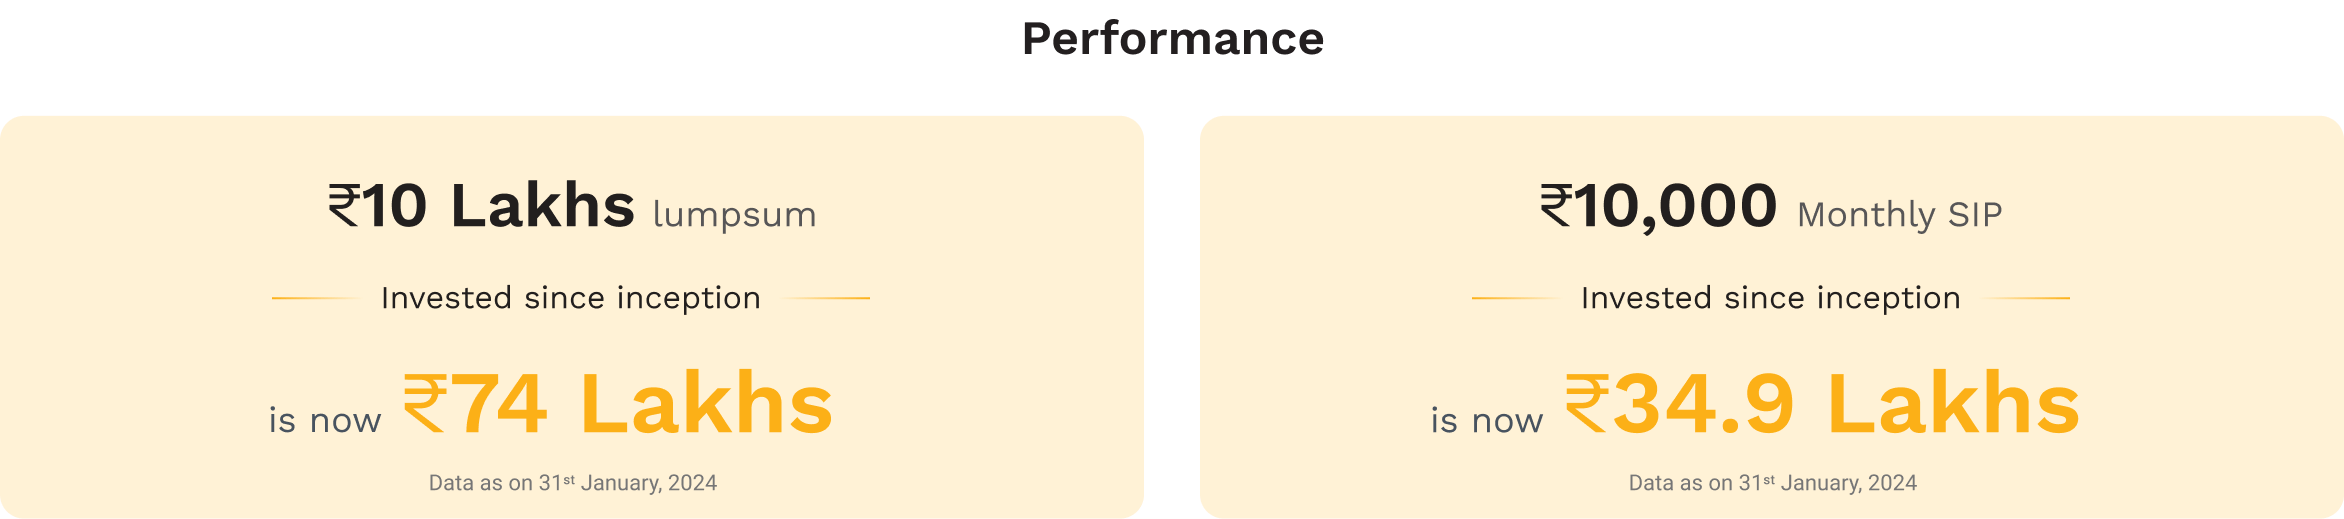 Why to Invest Performance